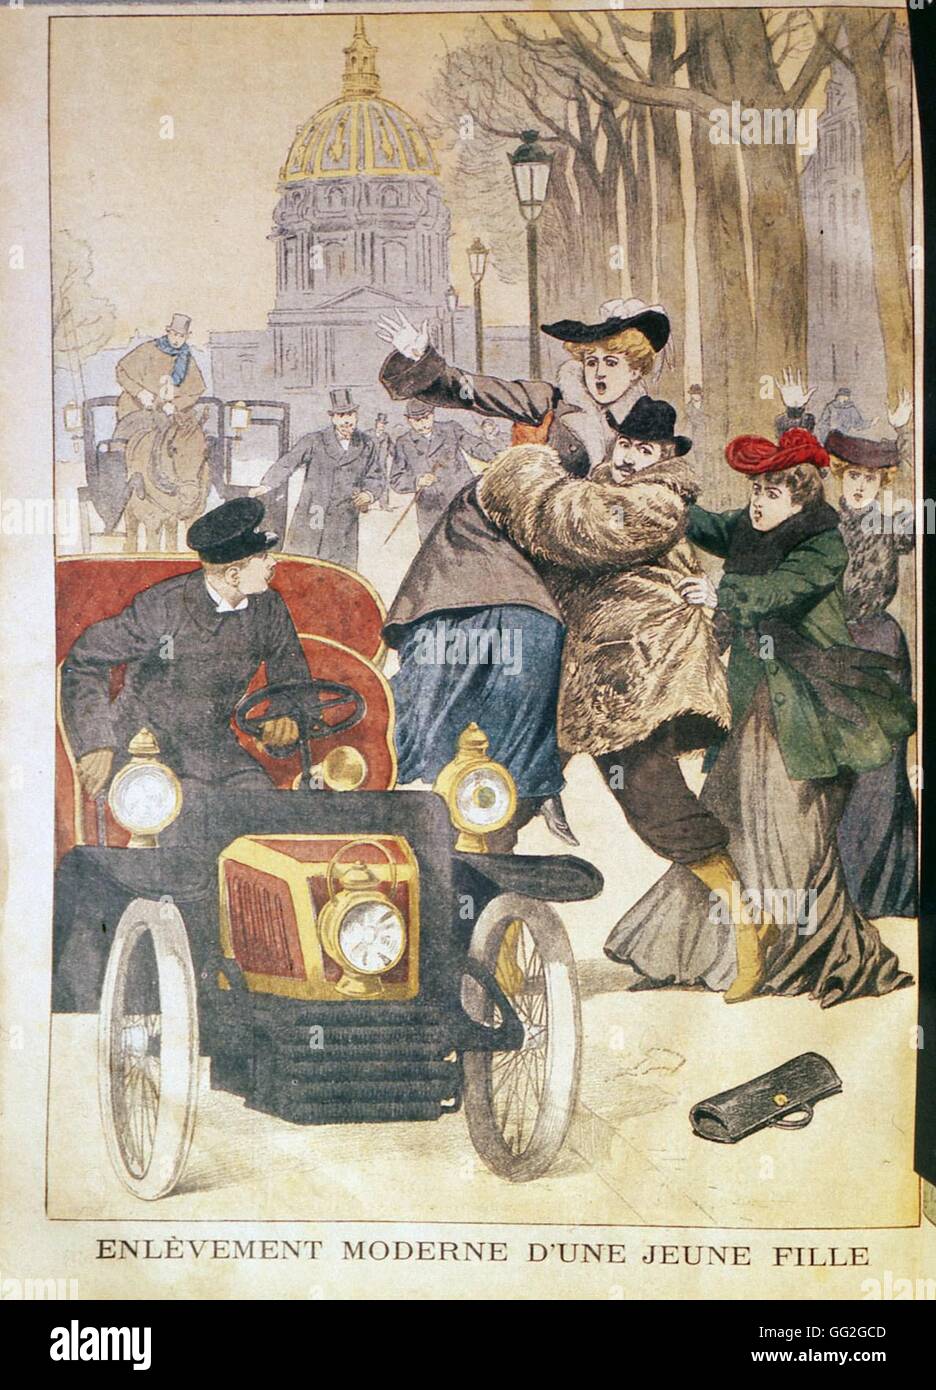 Abduction of a young woman in Paris in. 'Le Petit Journal' December 21, 1902 Stock Photo